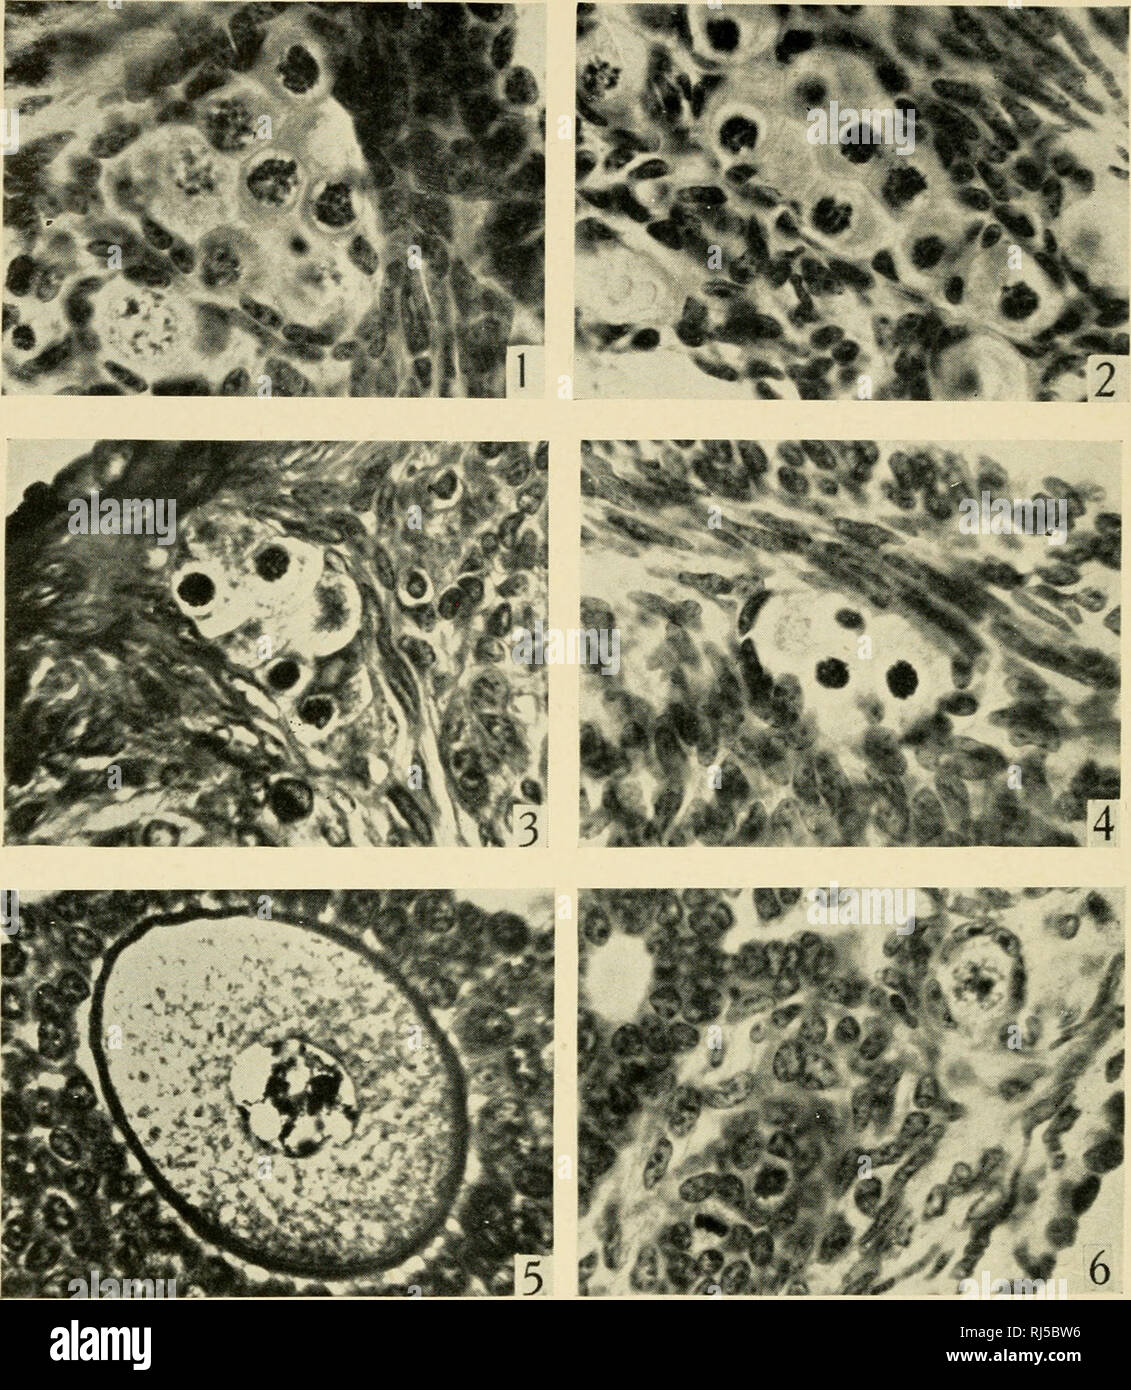 . Ciba Foundation colloquia on ageing. Old age; Aging; Animals -- growth &amp; development. Oocytes in Immature and Mature Guinea Pigs Fig. 1. Immature guinea pig. Nest of oocytes showing phases of meiosis, probably pachytene and diplotene. Fig. 2. Pubertal guinea pig. Nest of oocytes showing phases of meiosis, including zygotene. Fig. 3. Mature guinea pig. Nest of oocytes showing phases of meiosis, including apparent zygotens. Fig. 4. Old guinea pig. Nest of oocytes showing phases of meiosis, including apparent zygotene. Fig. 5. Normal oocyte, showing pachytene phase of meiosis. Fig. 6. Three Stock Photo